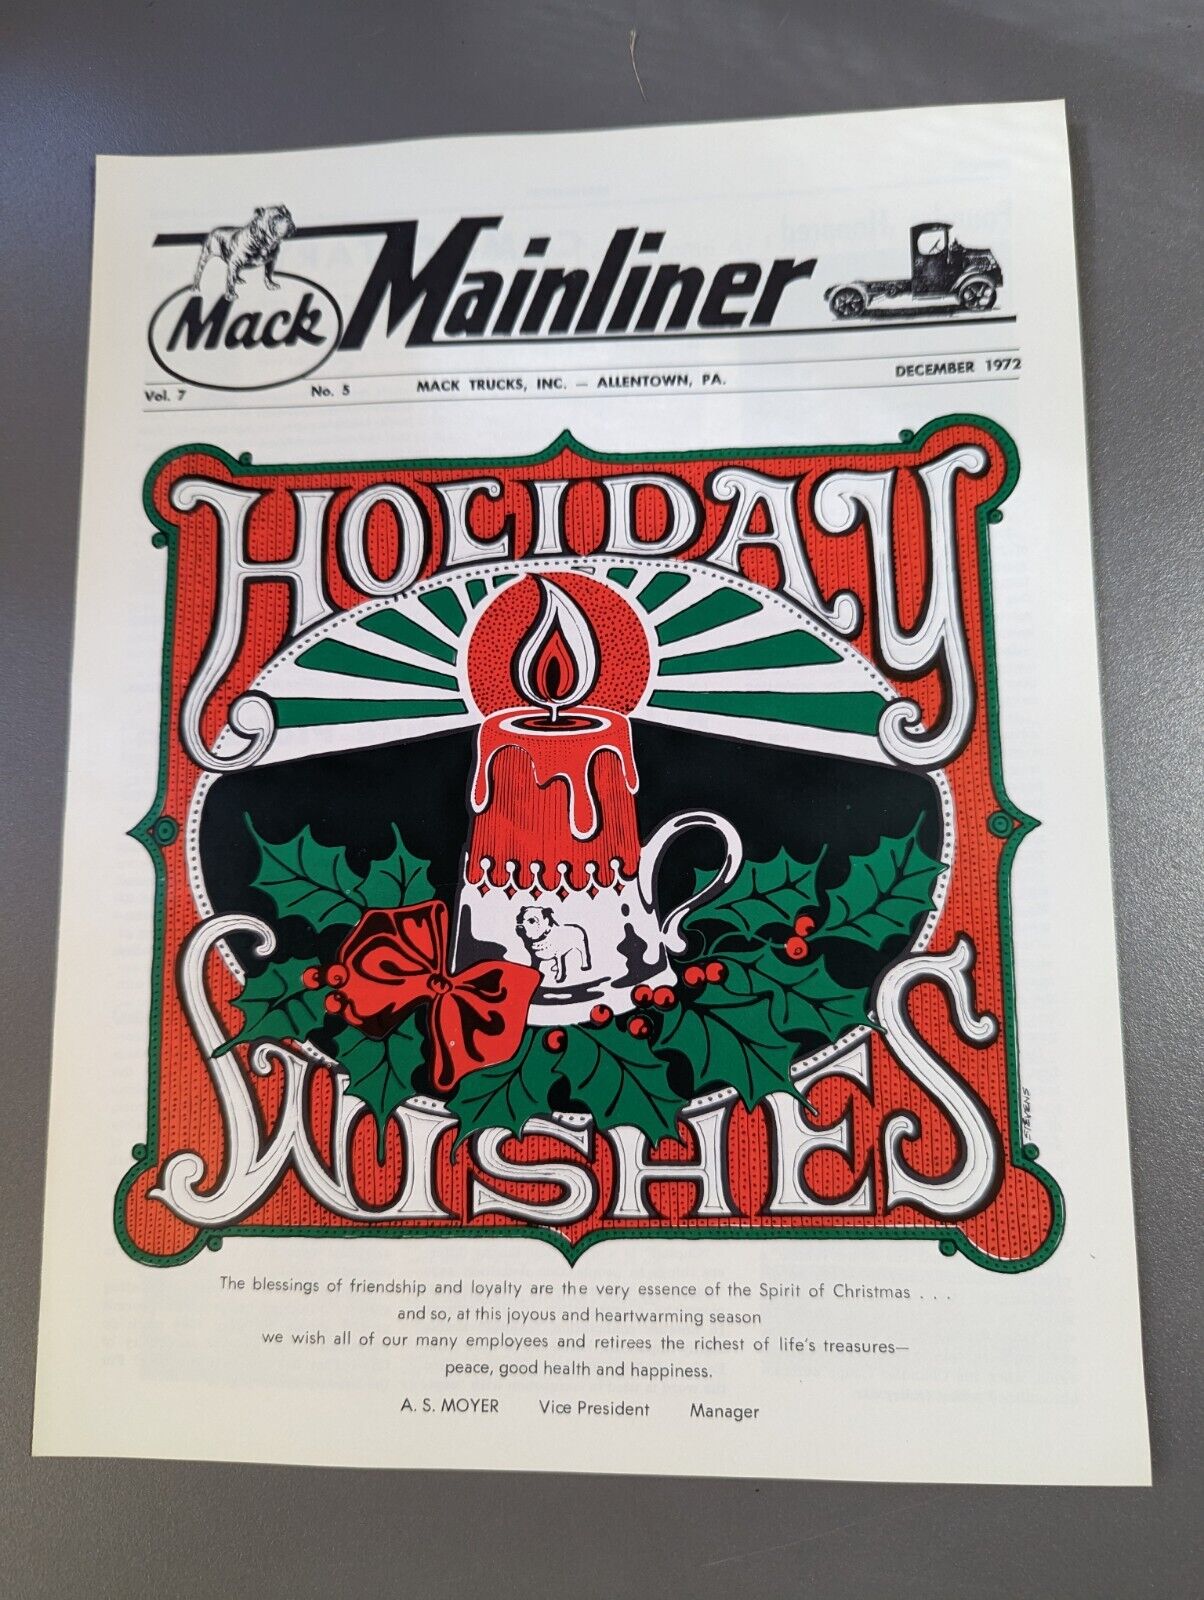 MACK Mainliners Holiday Wishes December 1972